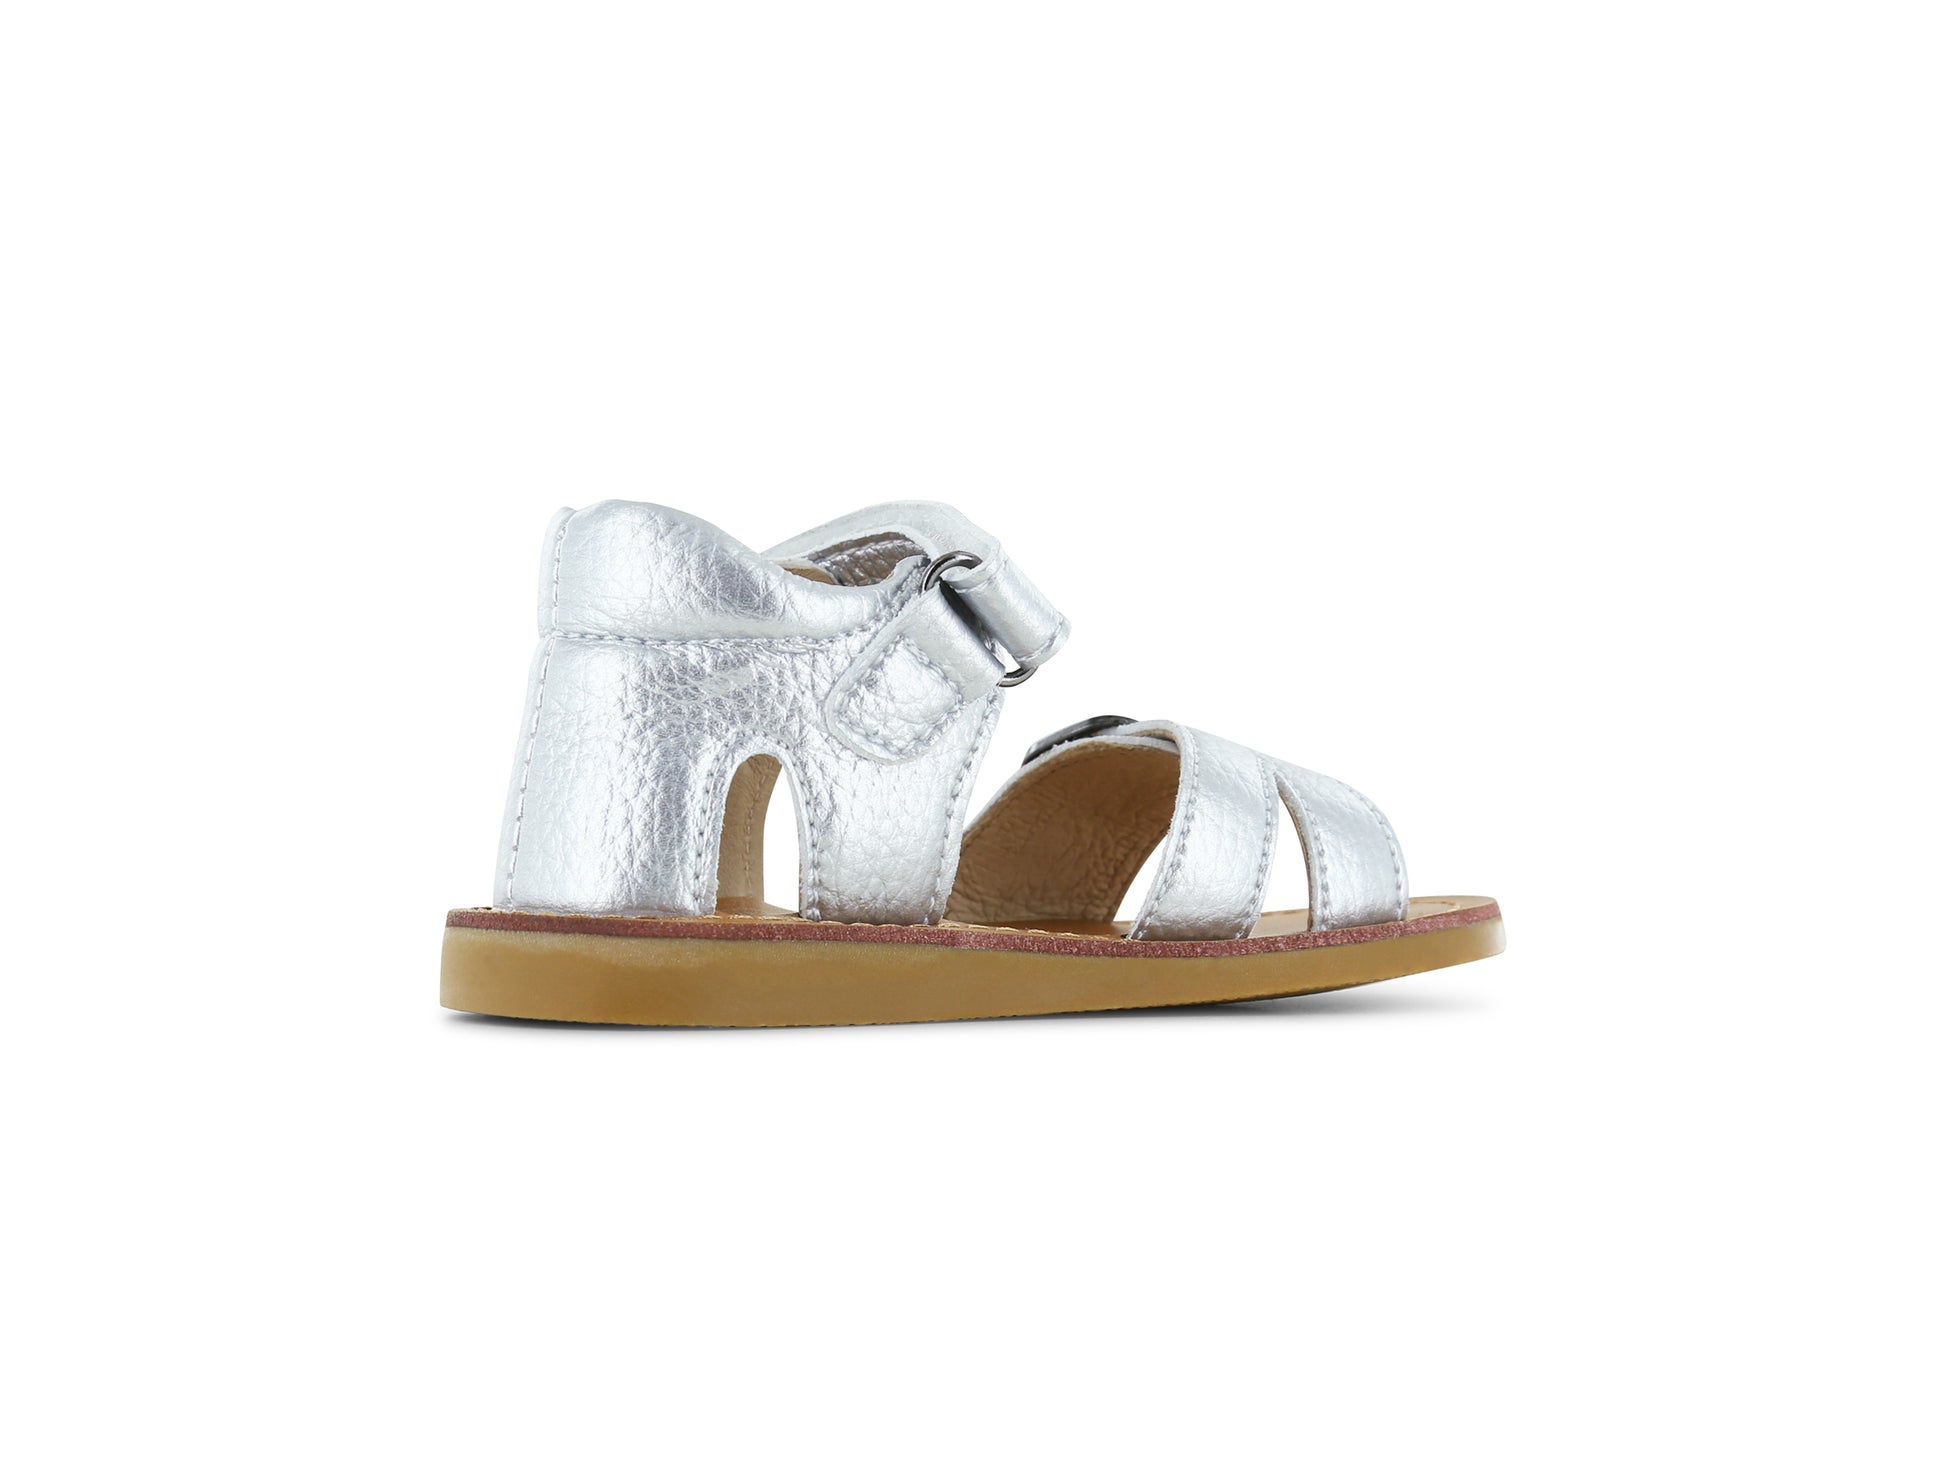 A girls open toe closed back sandal by Shoesme, style CS24S001-C, in silver leather with velcro and buckle fastening. Left side view.